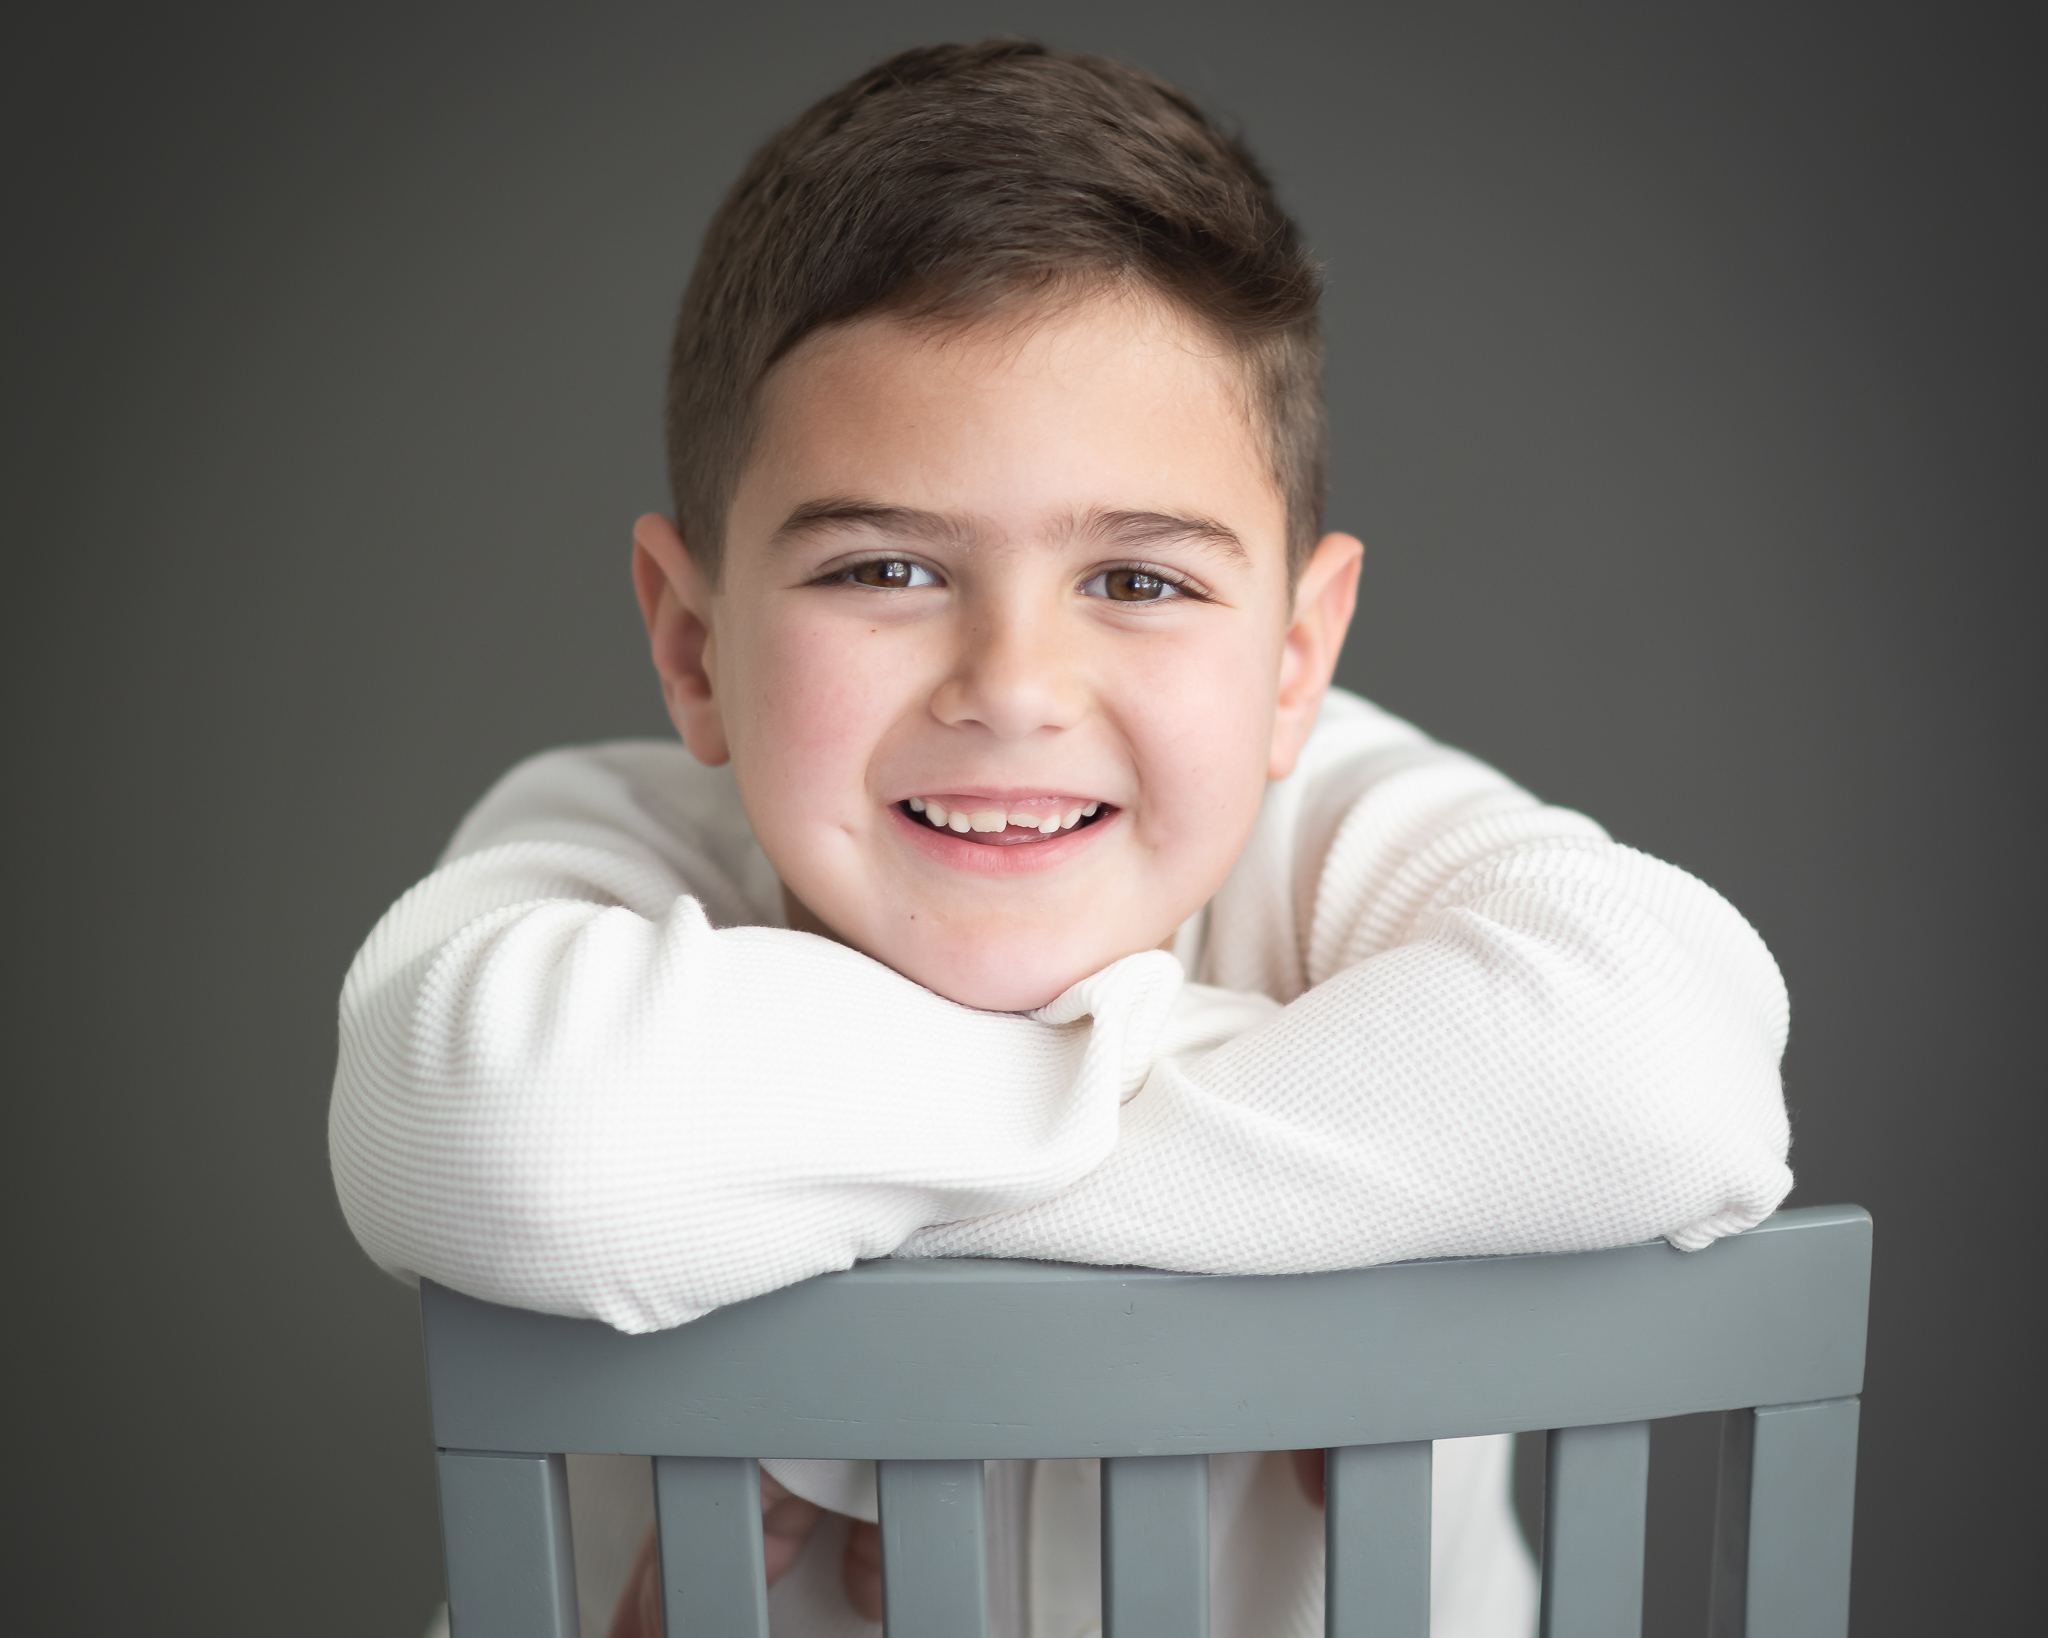 Handsome and adorable boy studio portrait wearing white shirt with grey backdrop